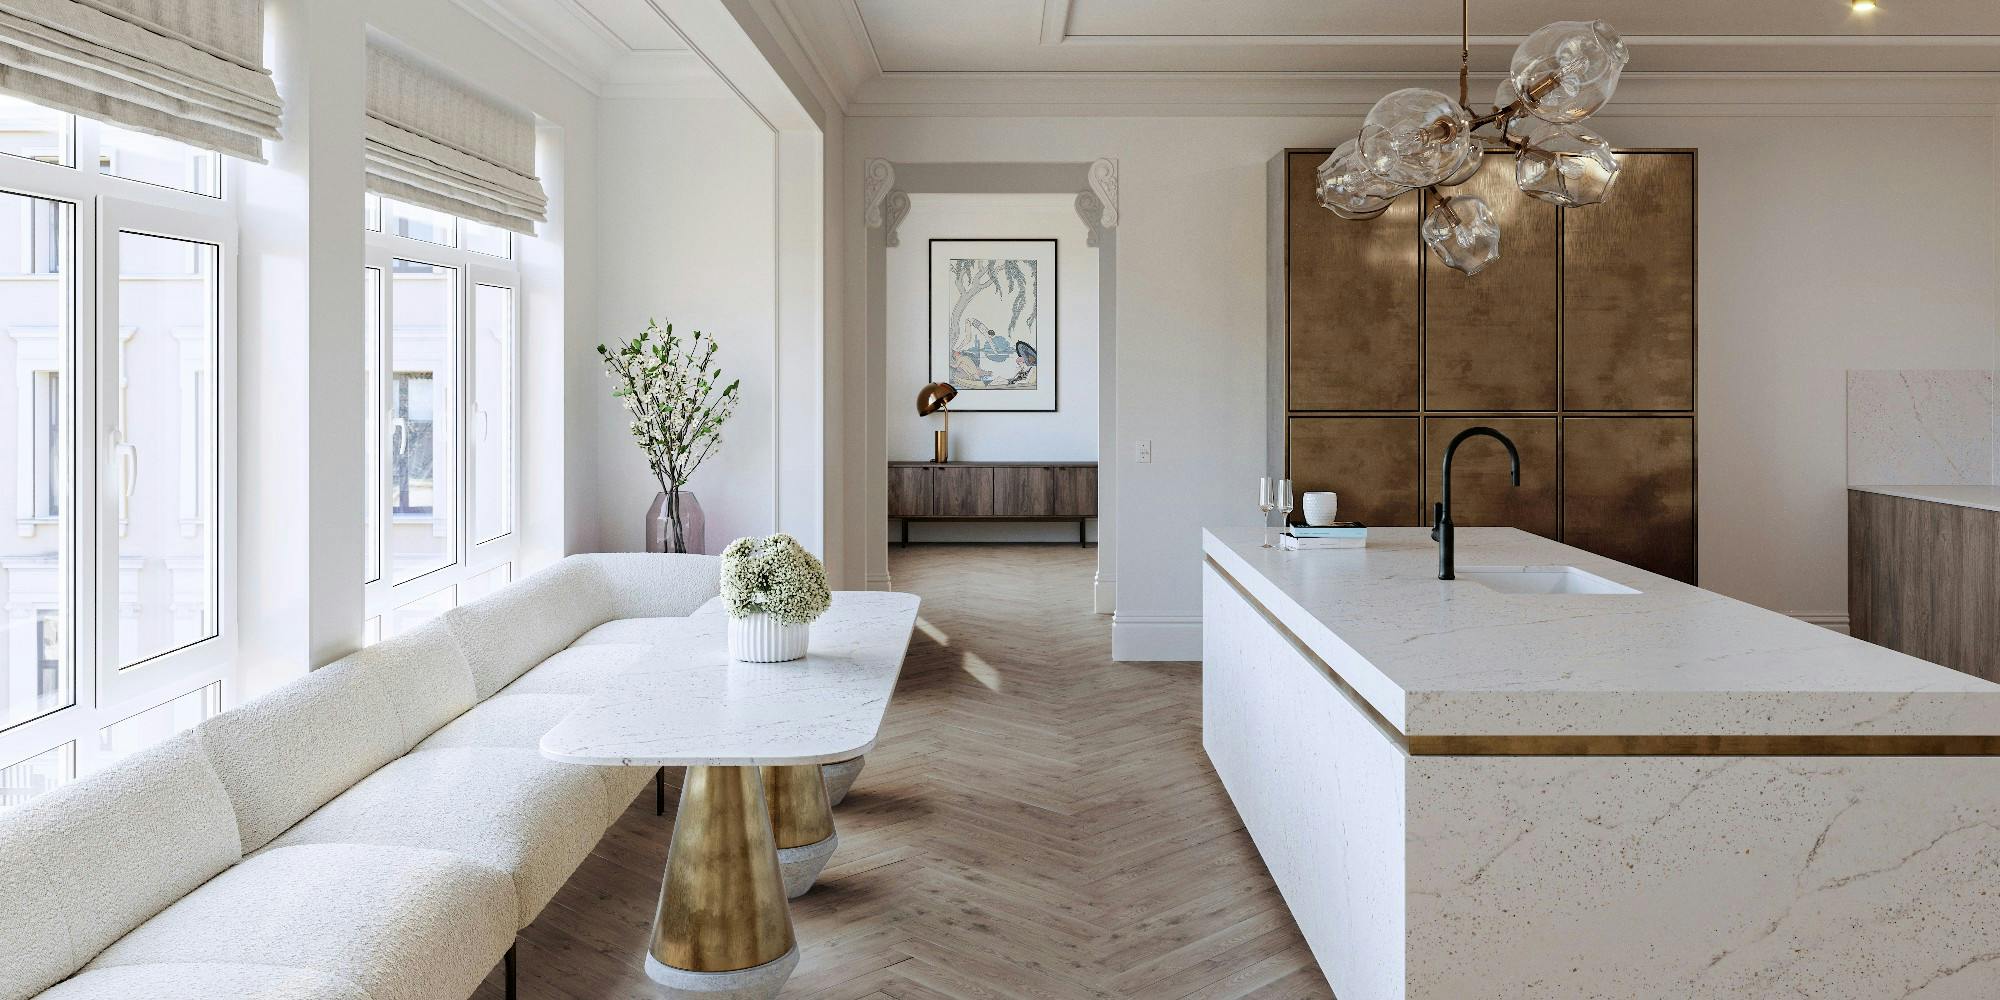 Imagen número 75 de {{The new luxury: natural stone is on trend again, but this time with a chic twist}}